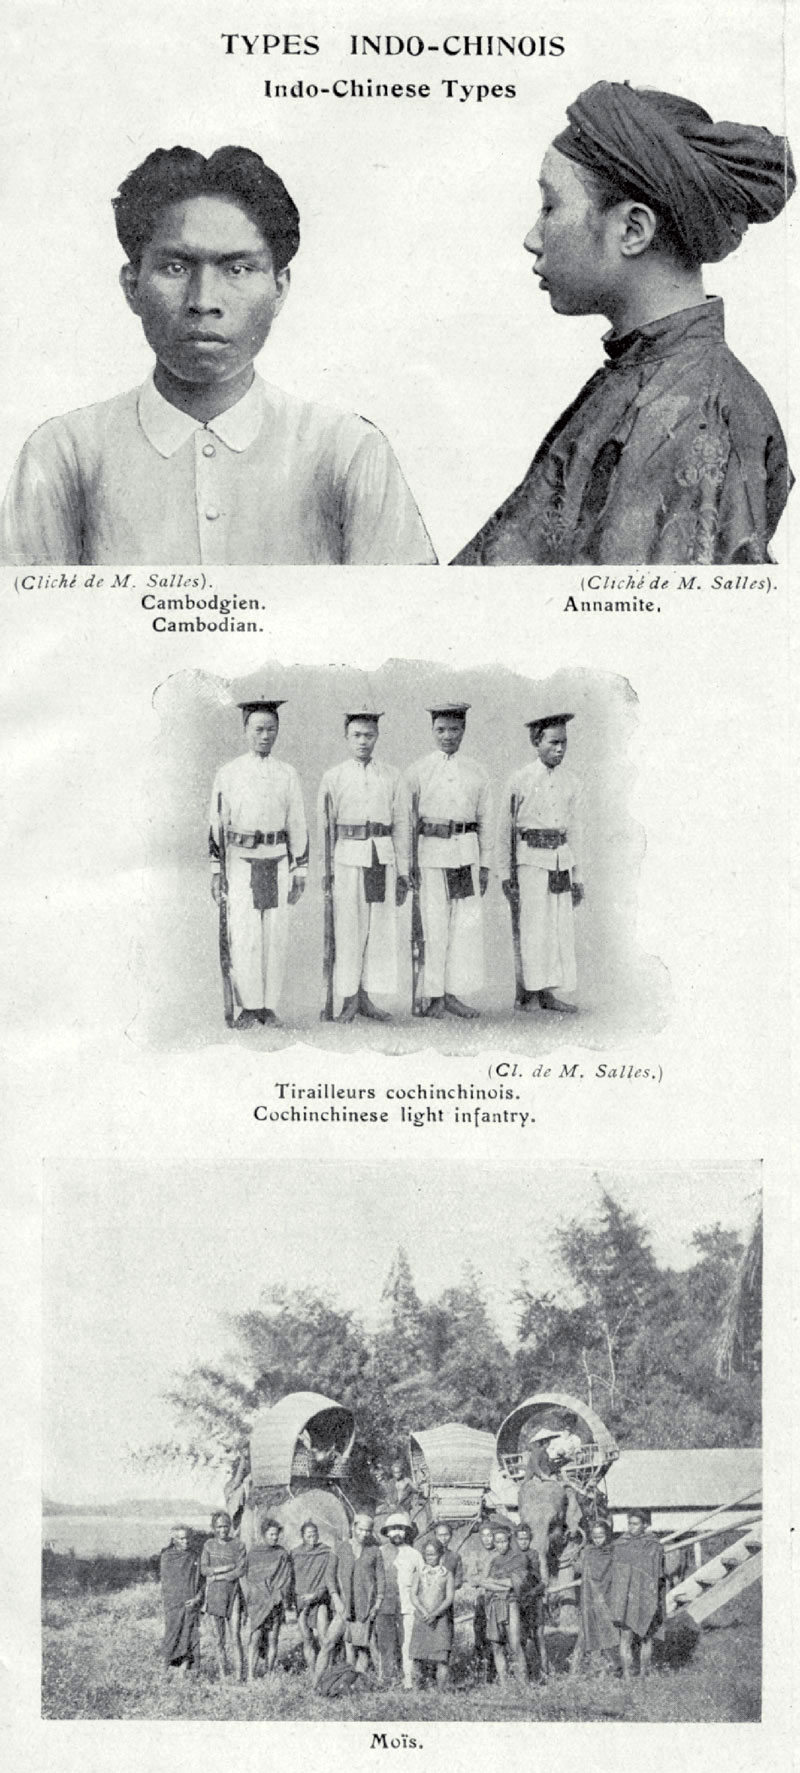 A page from the book “Comité de Tourisme Colonial, Indochine,” published before 1915, with photographs depicting so-called Types Indo-Chinois.